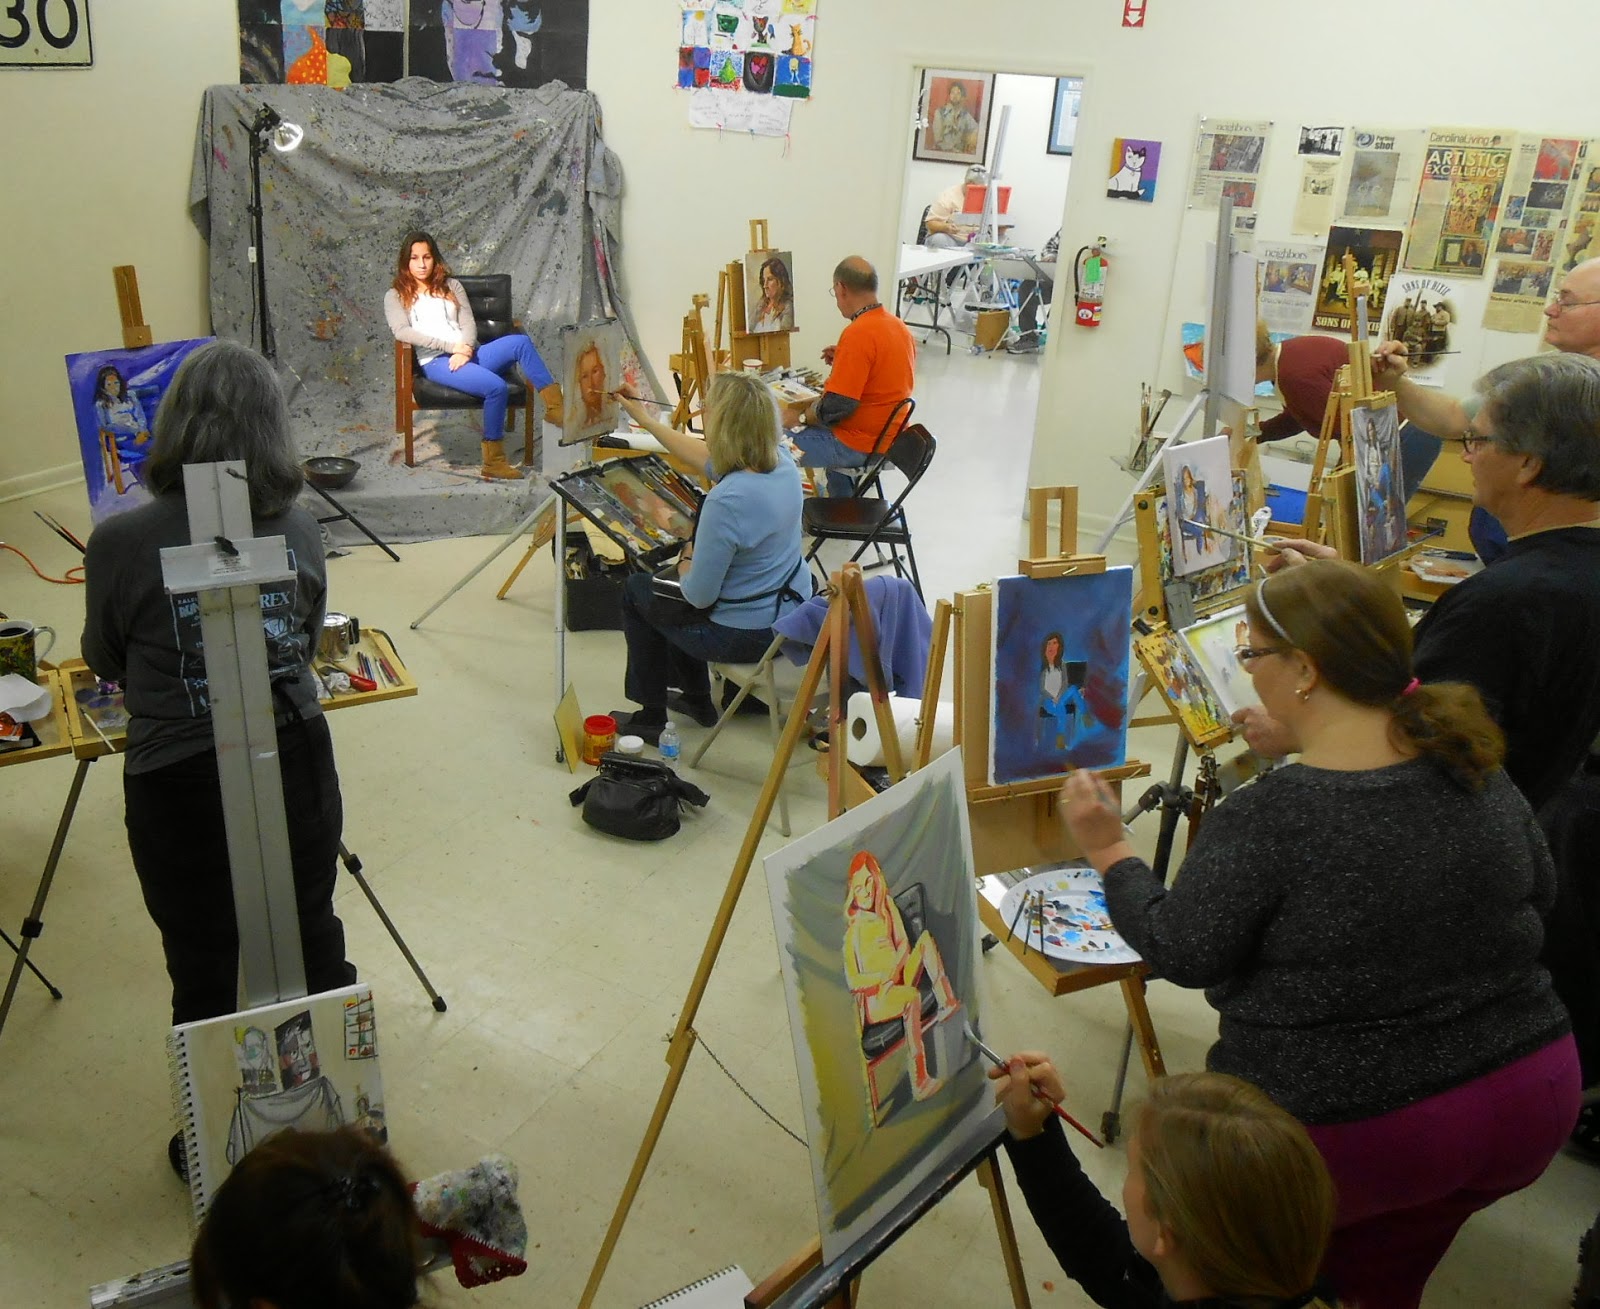 Onslow Art Expressions Life Class Was Awesome We Had A